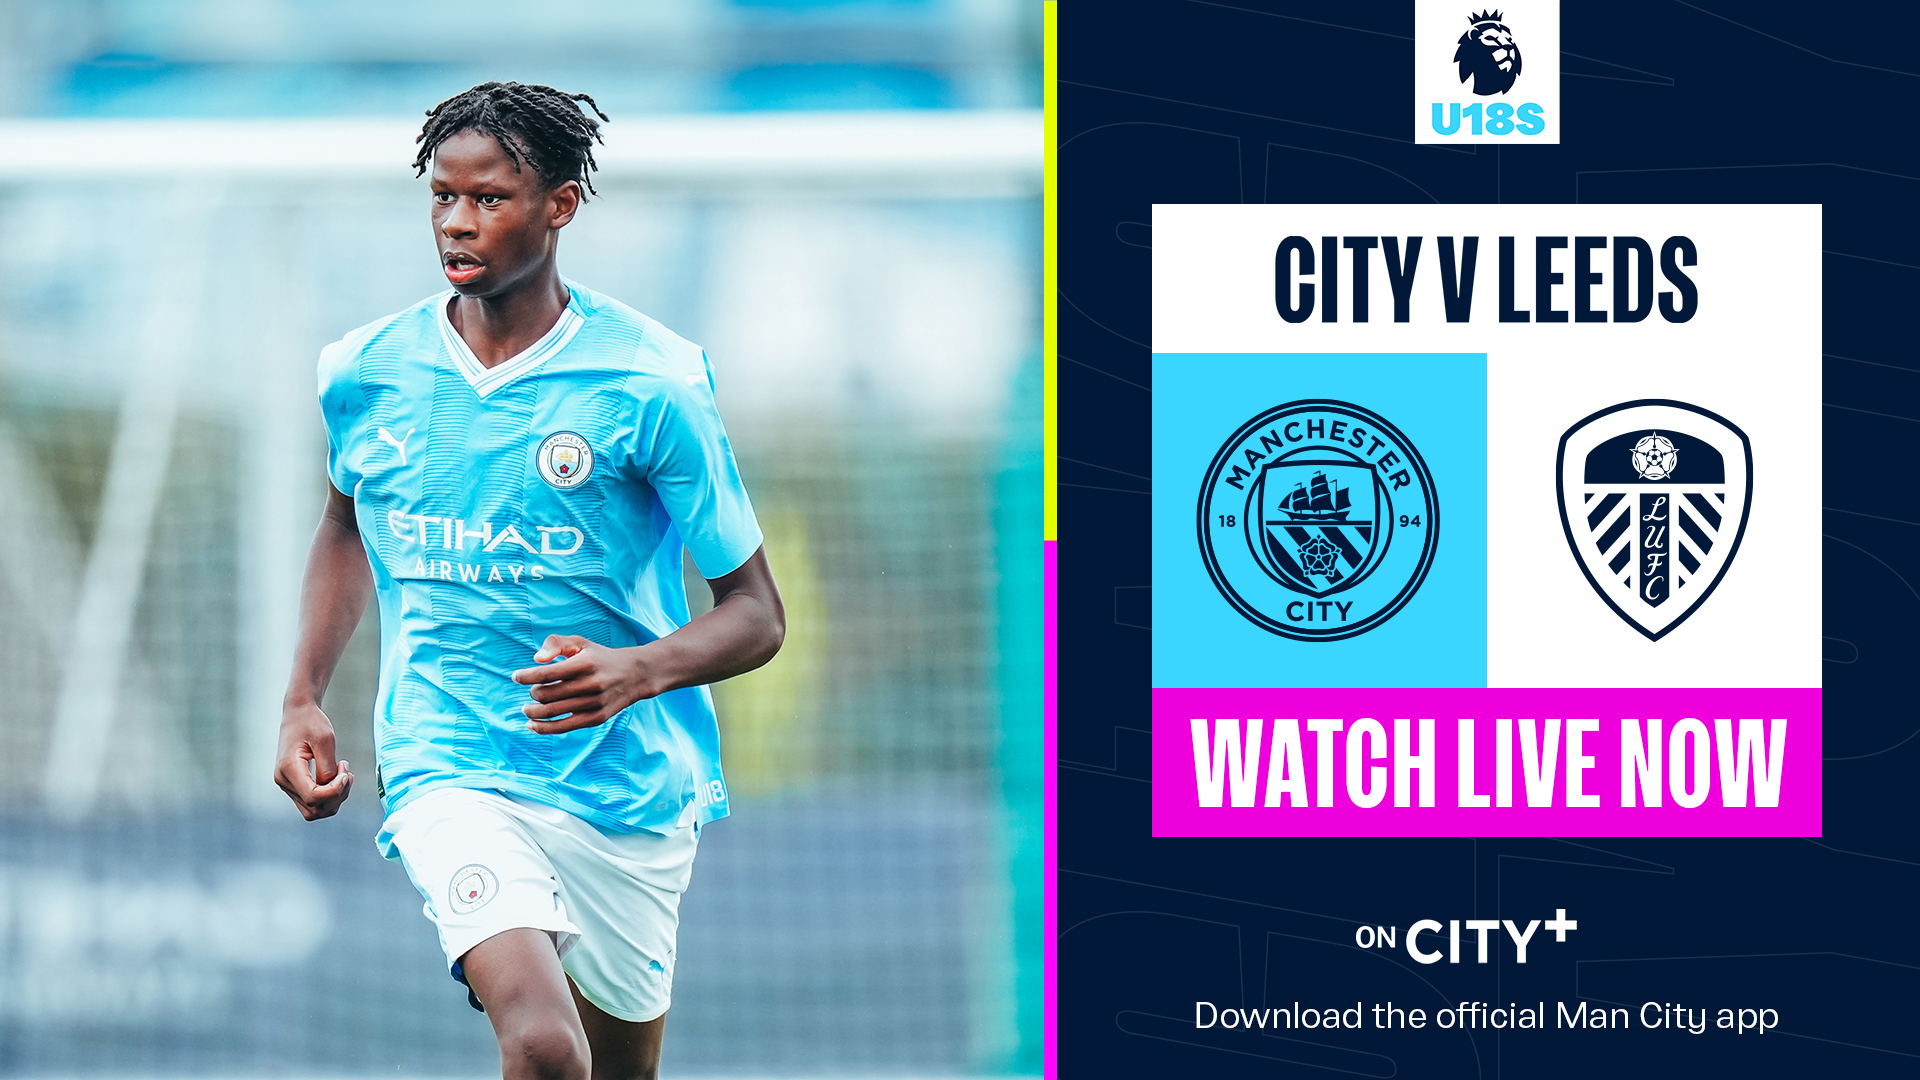 Man City EDS and Academy Videos